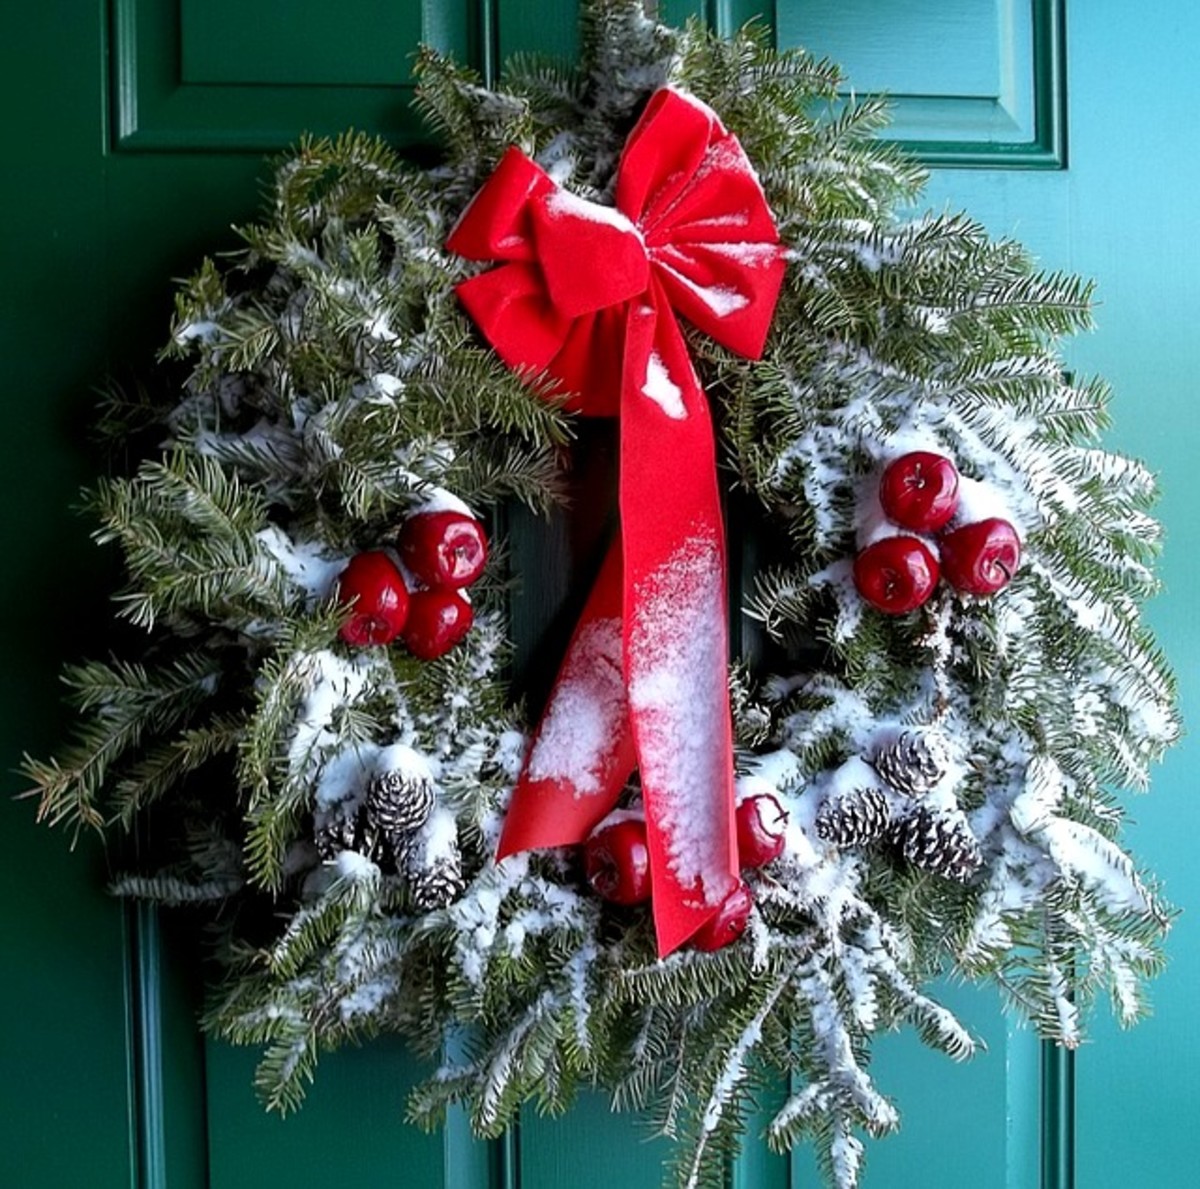 Festive wreath made with natural materials